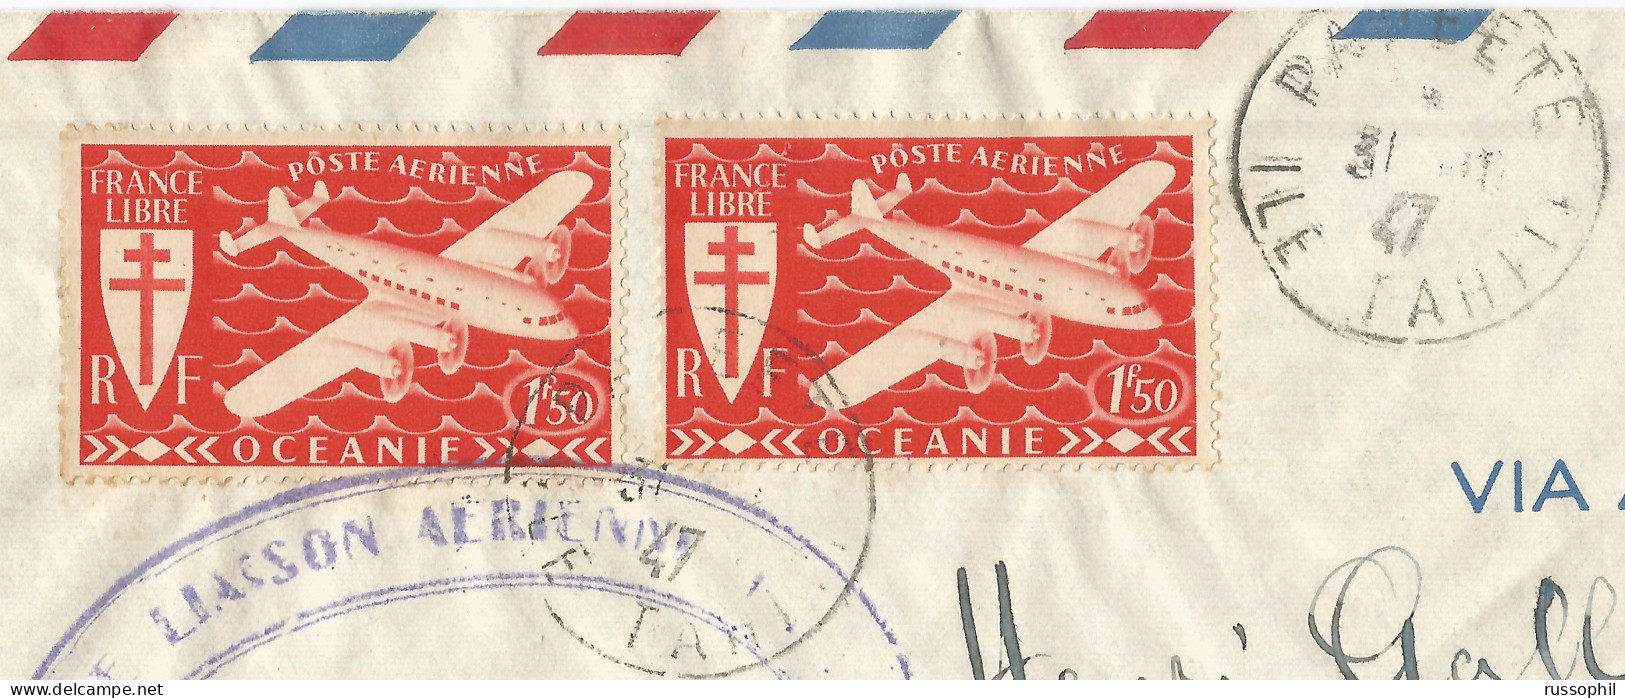 OCEANIE -  TRAPAS - 3 FR. FRANKING ON AIR COVER FROM PAPEETE TO NEW CALEDONIA - RETURNED TO SENDER - 1947 - Lettres & Documents